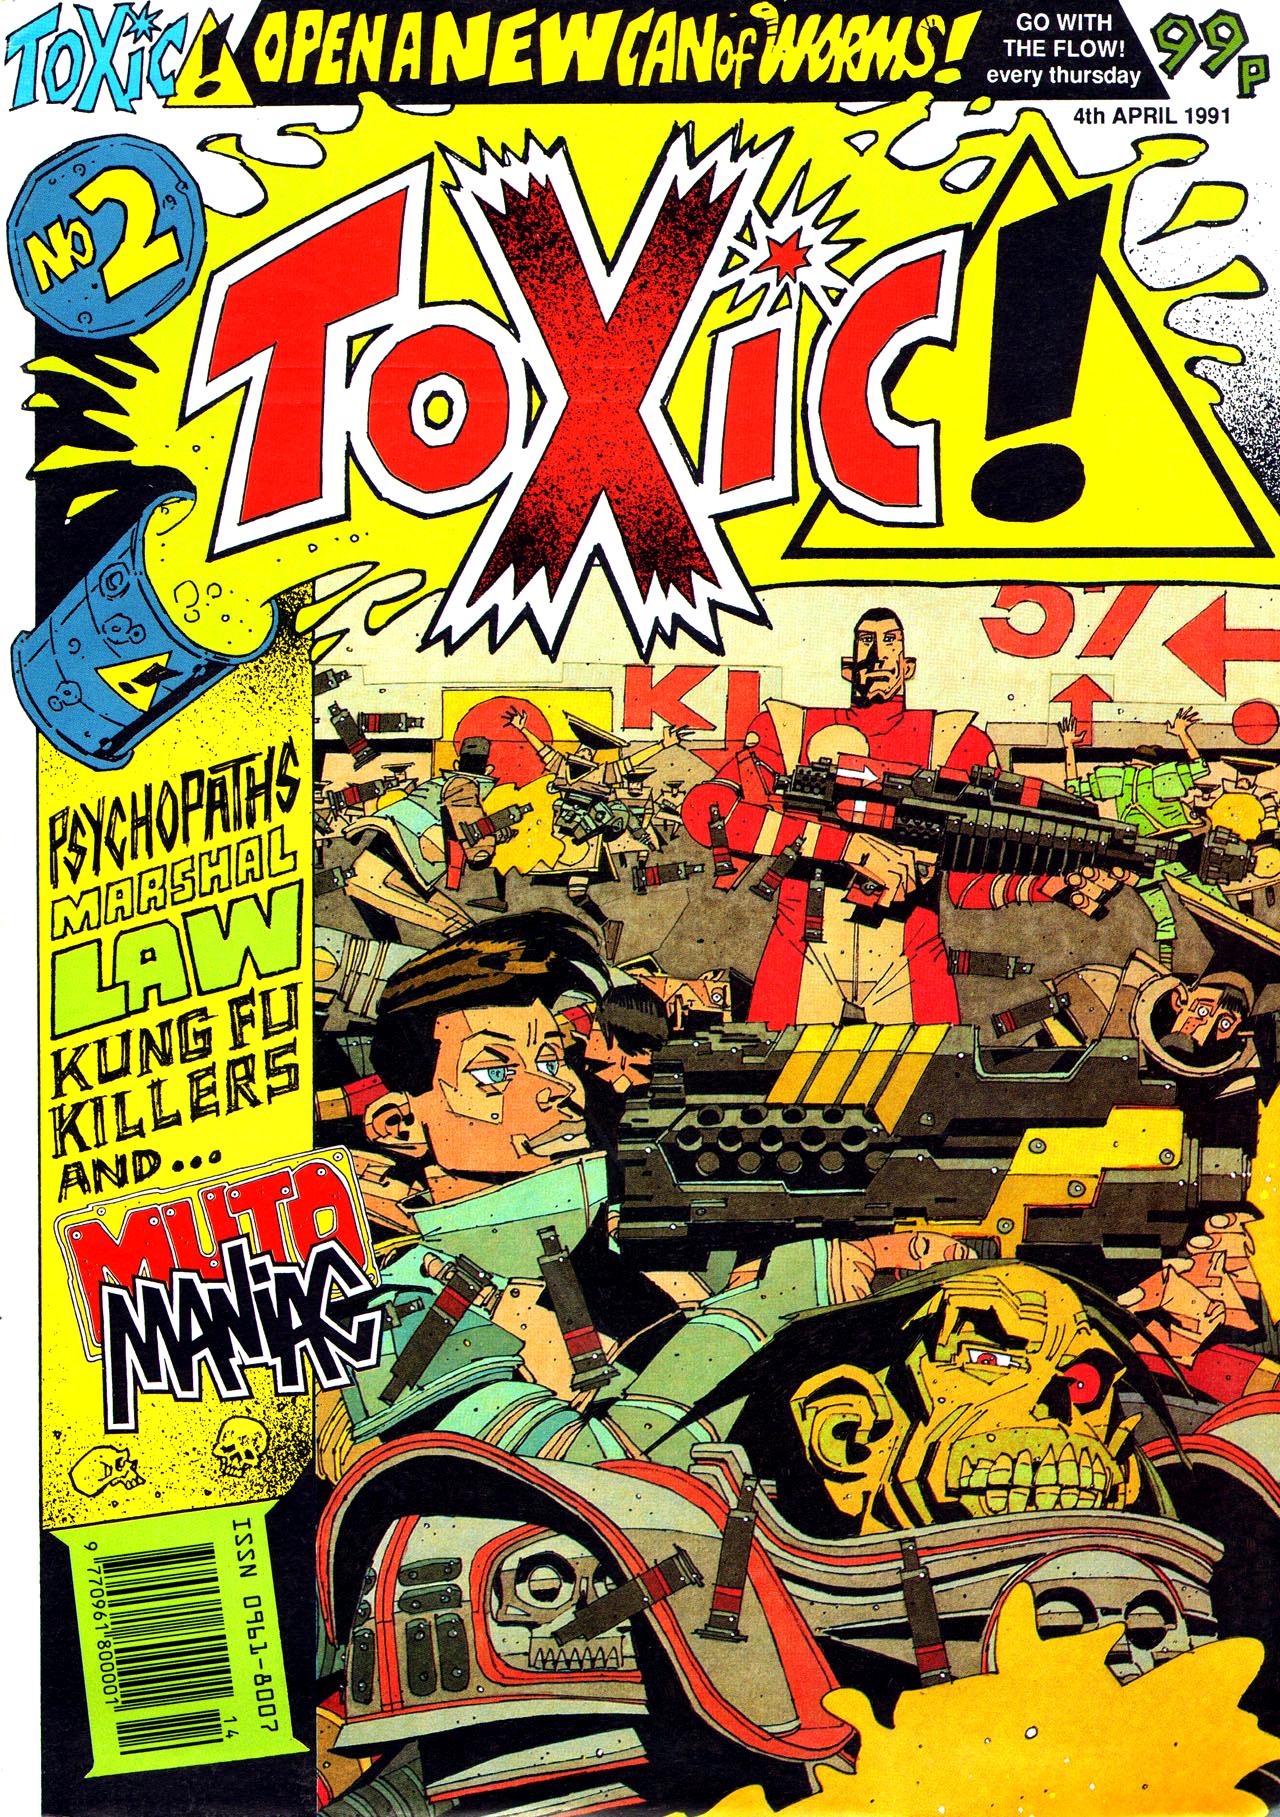 Read online Toxic! comic -  Issue #2 - 1